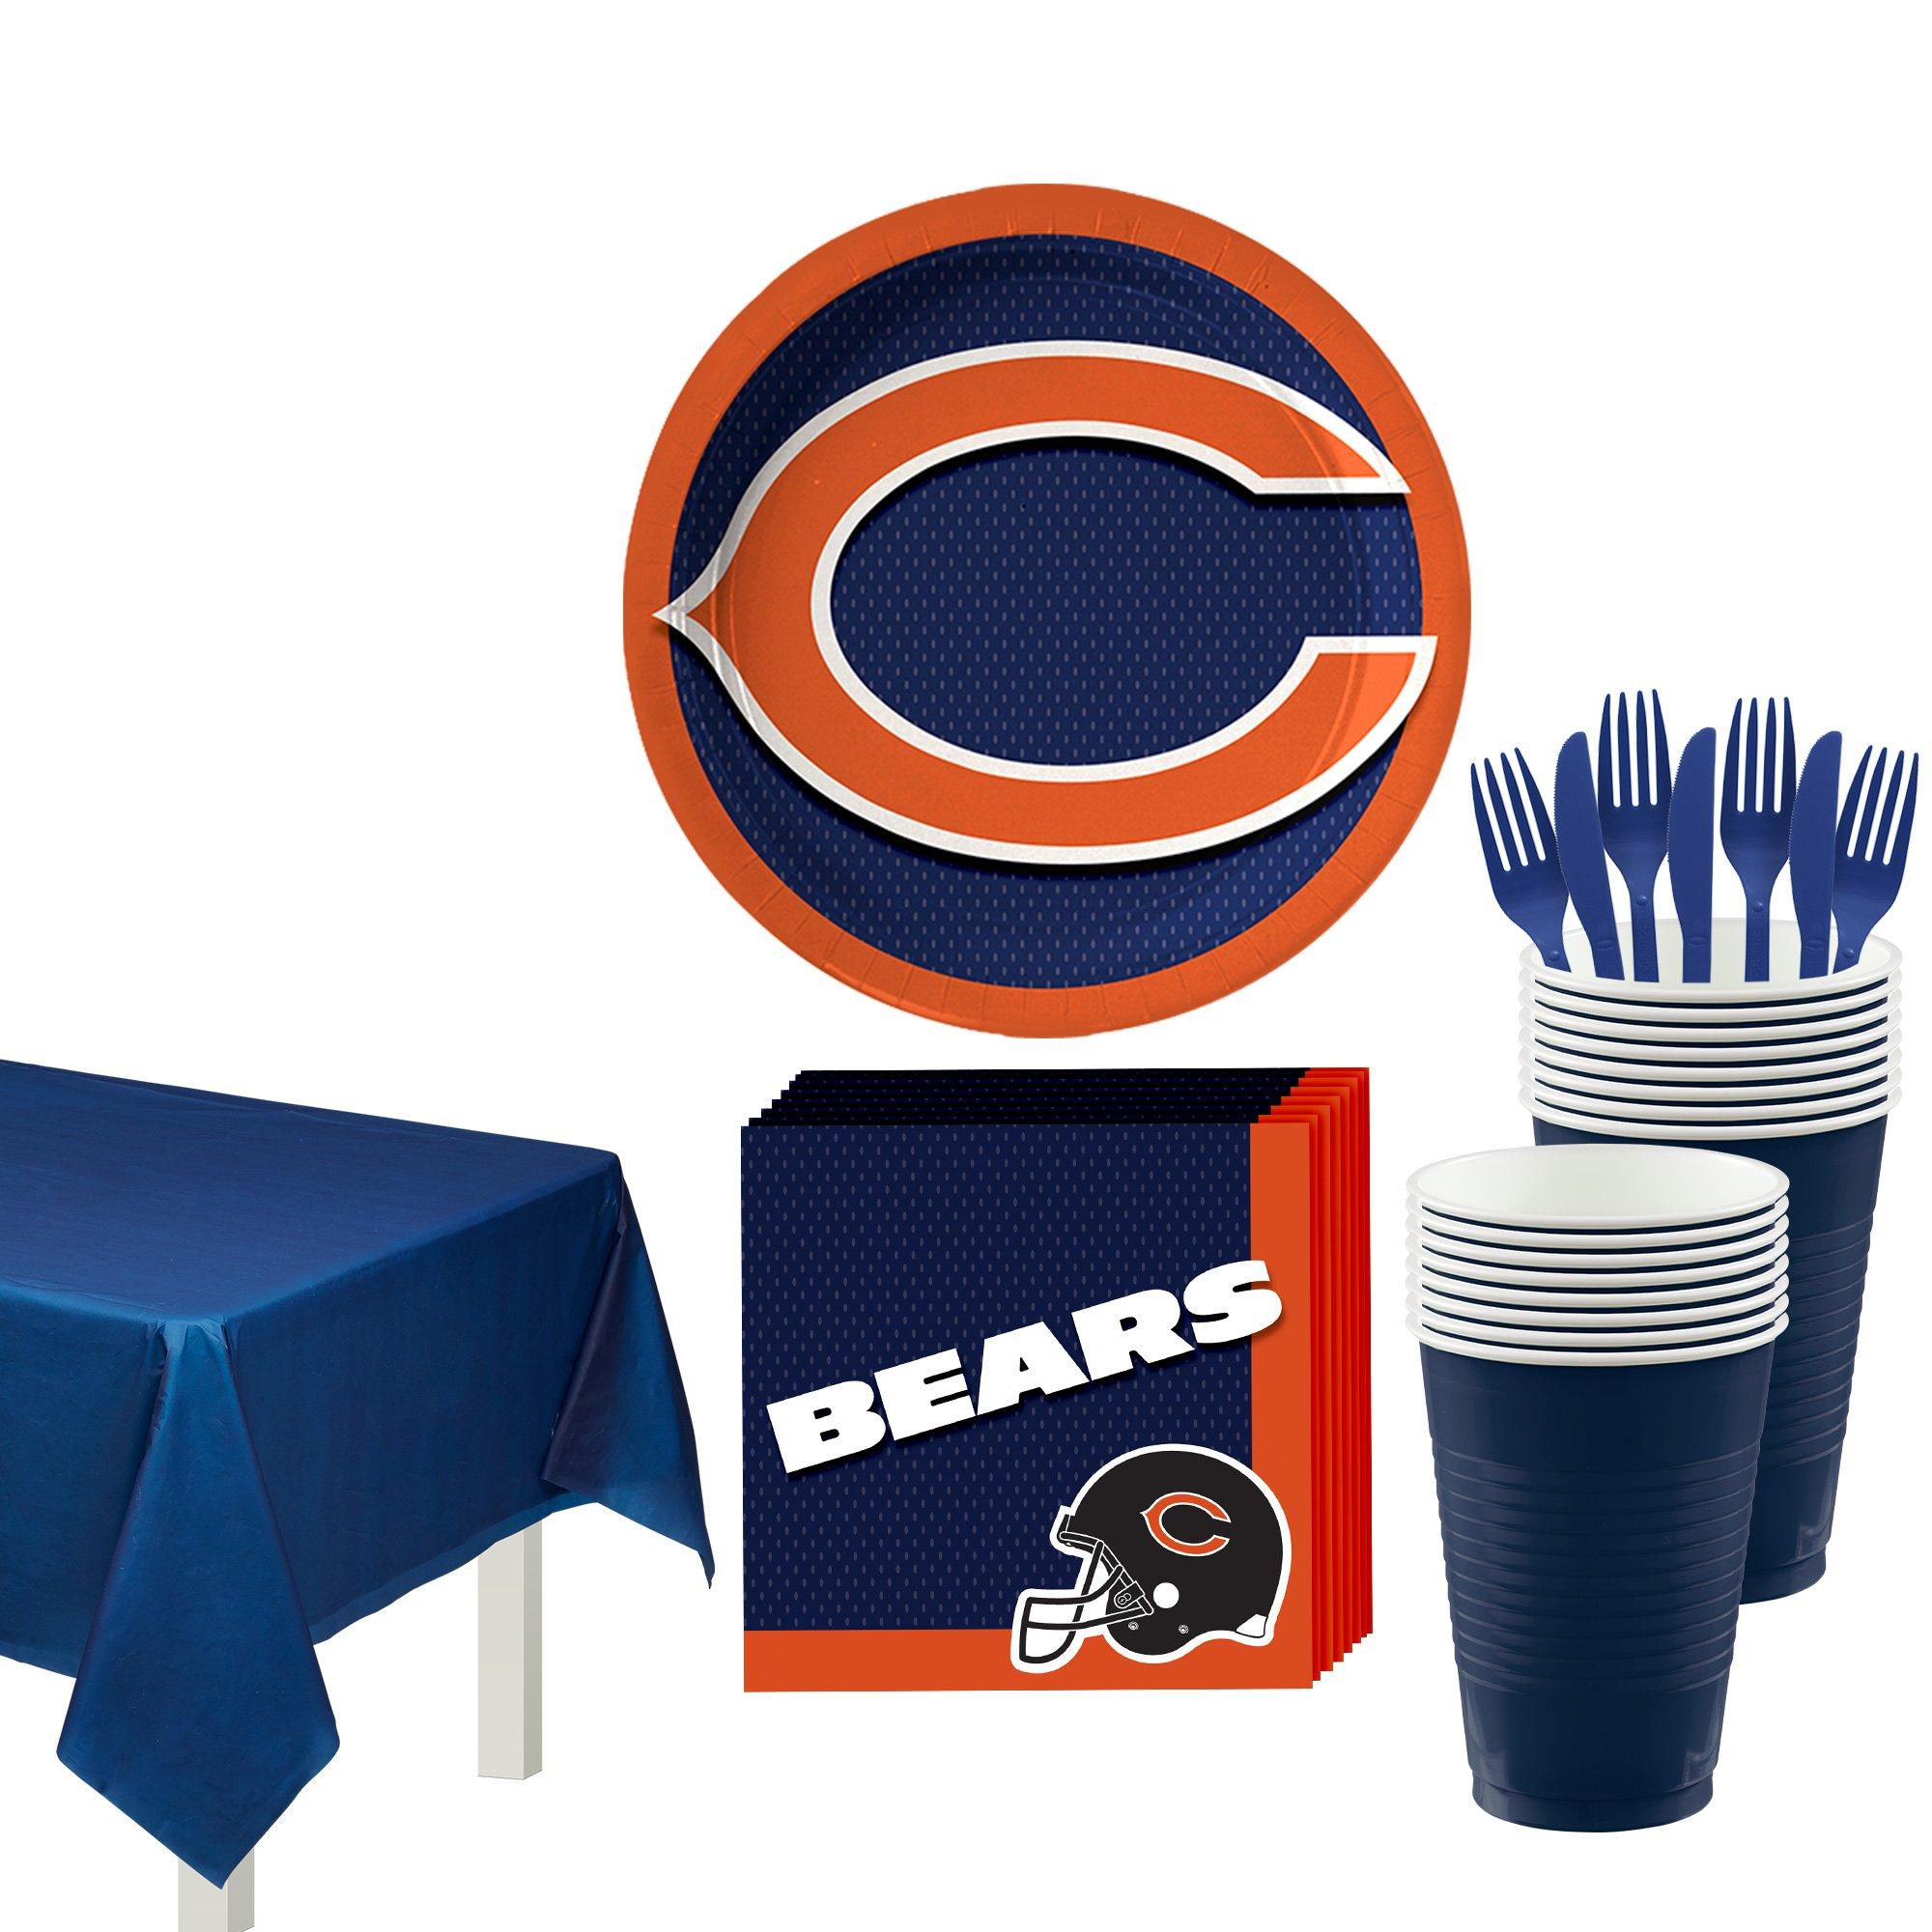 Chicago Bears Colored Football Birthday Party Invitation